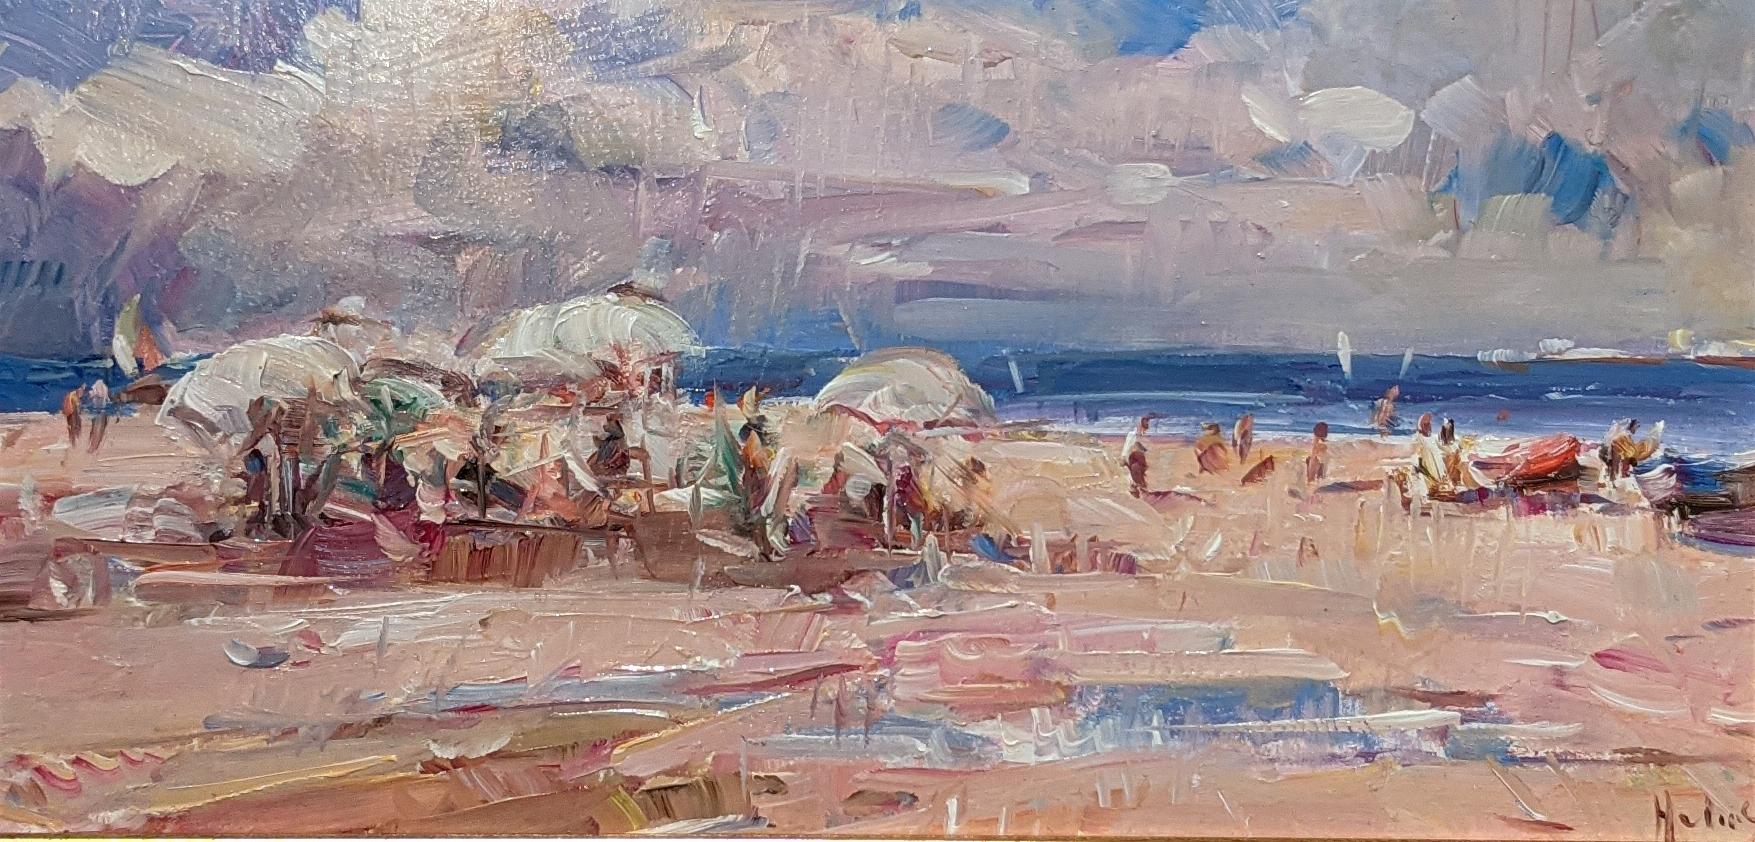 'Parasols' Colourful Contemporary beach scene of sea, sand, sky & figures - Painting by Helios Gisbert